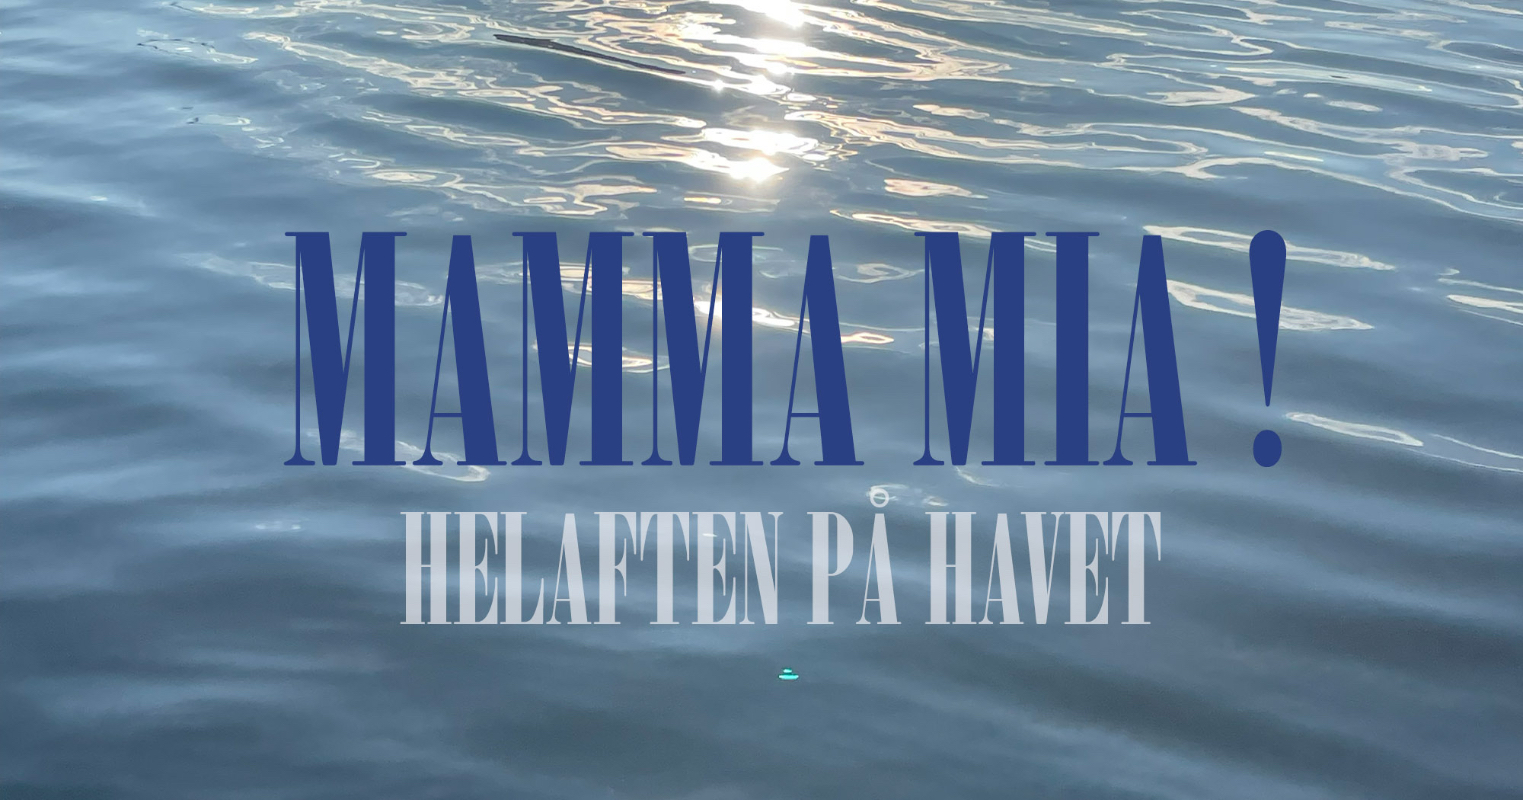 May be an image of body of water and text that says "HELAFTEN TEN PÃ HAVET"